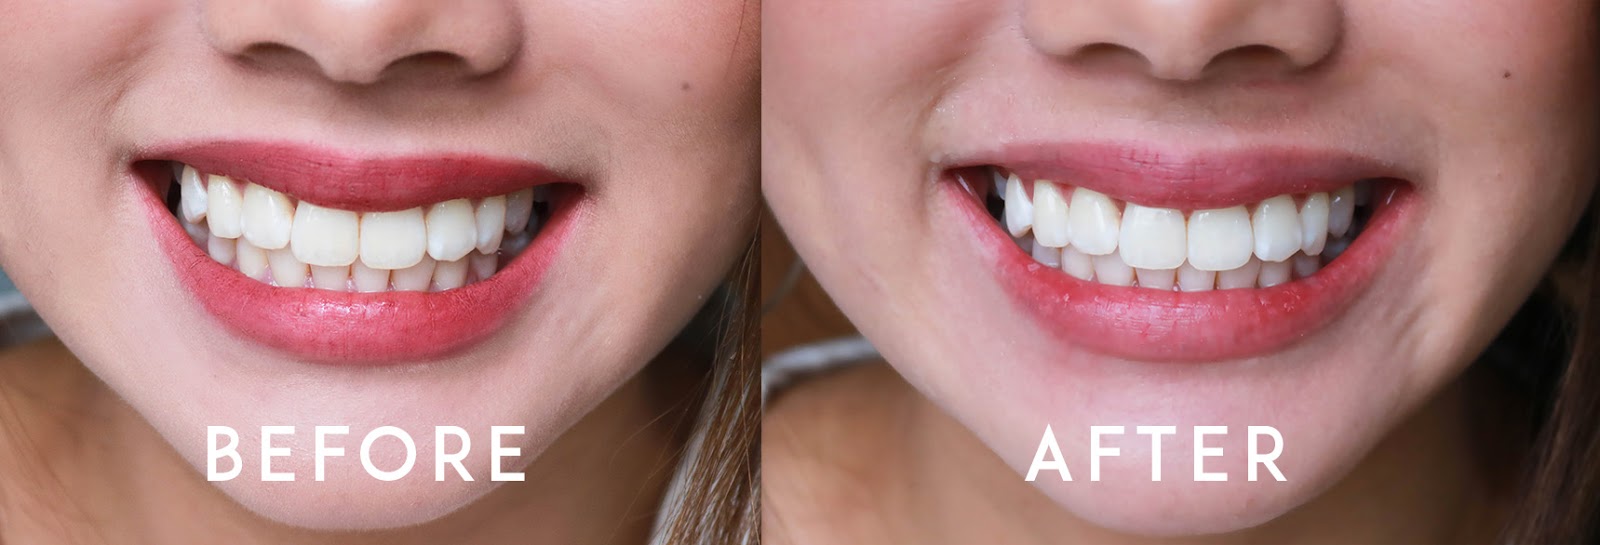 pop smile results, honest , before and after